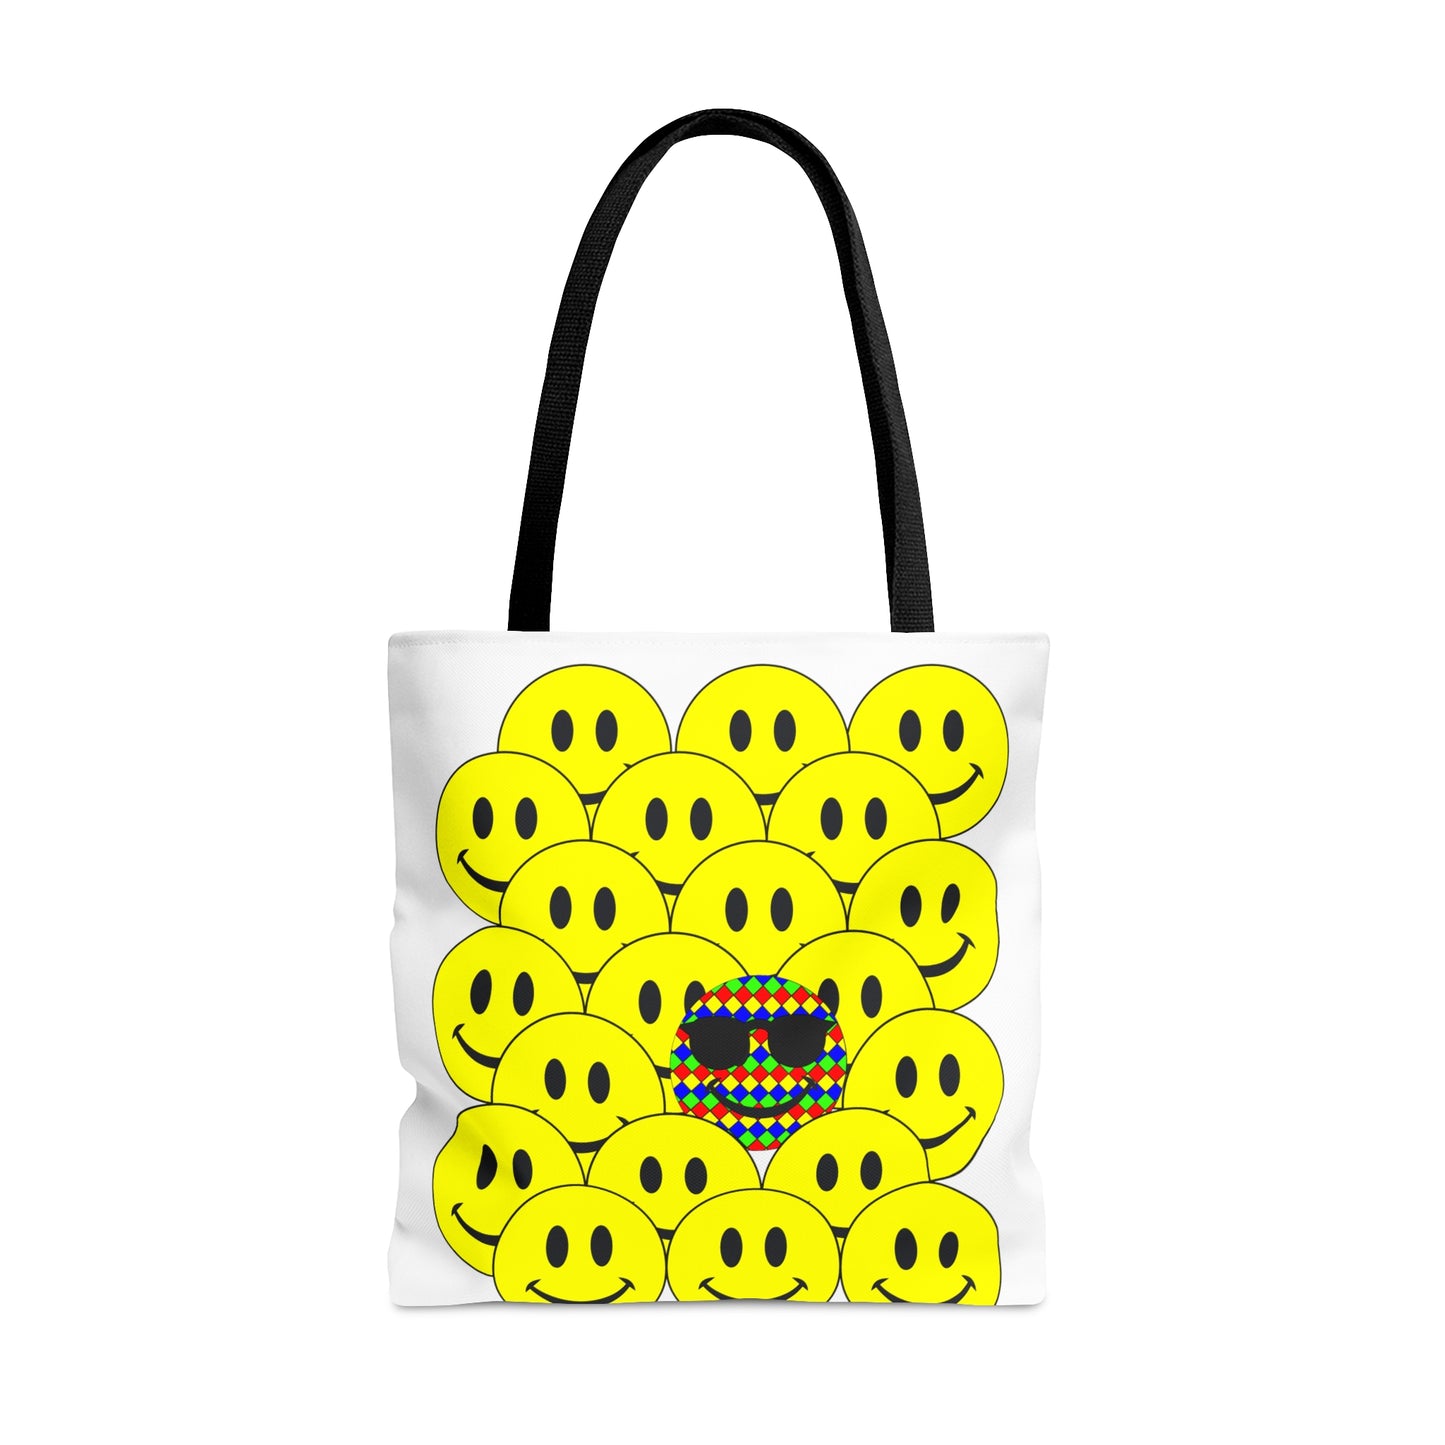 AOP Tote Bag "Think different"